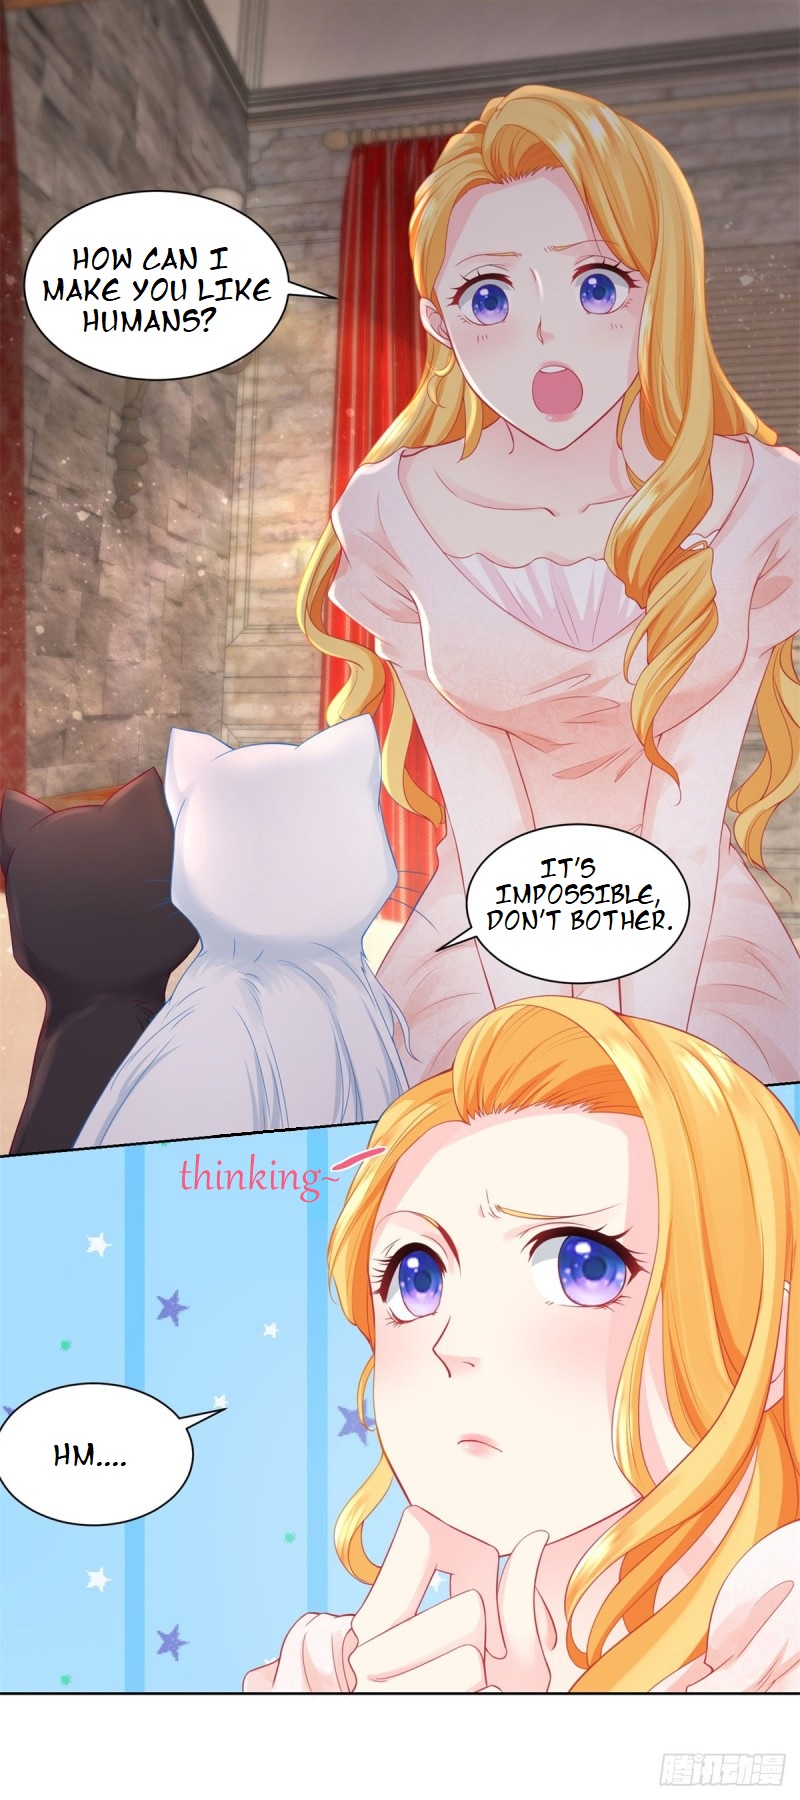 I Just Want to Be a Useless Duke's Daughter Vol. 1 Ch. 7